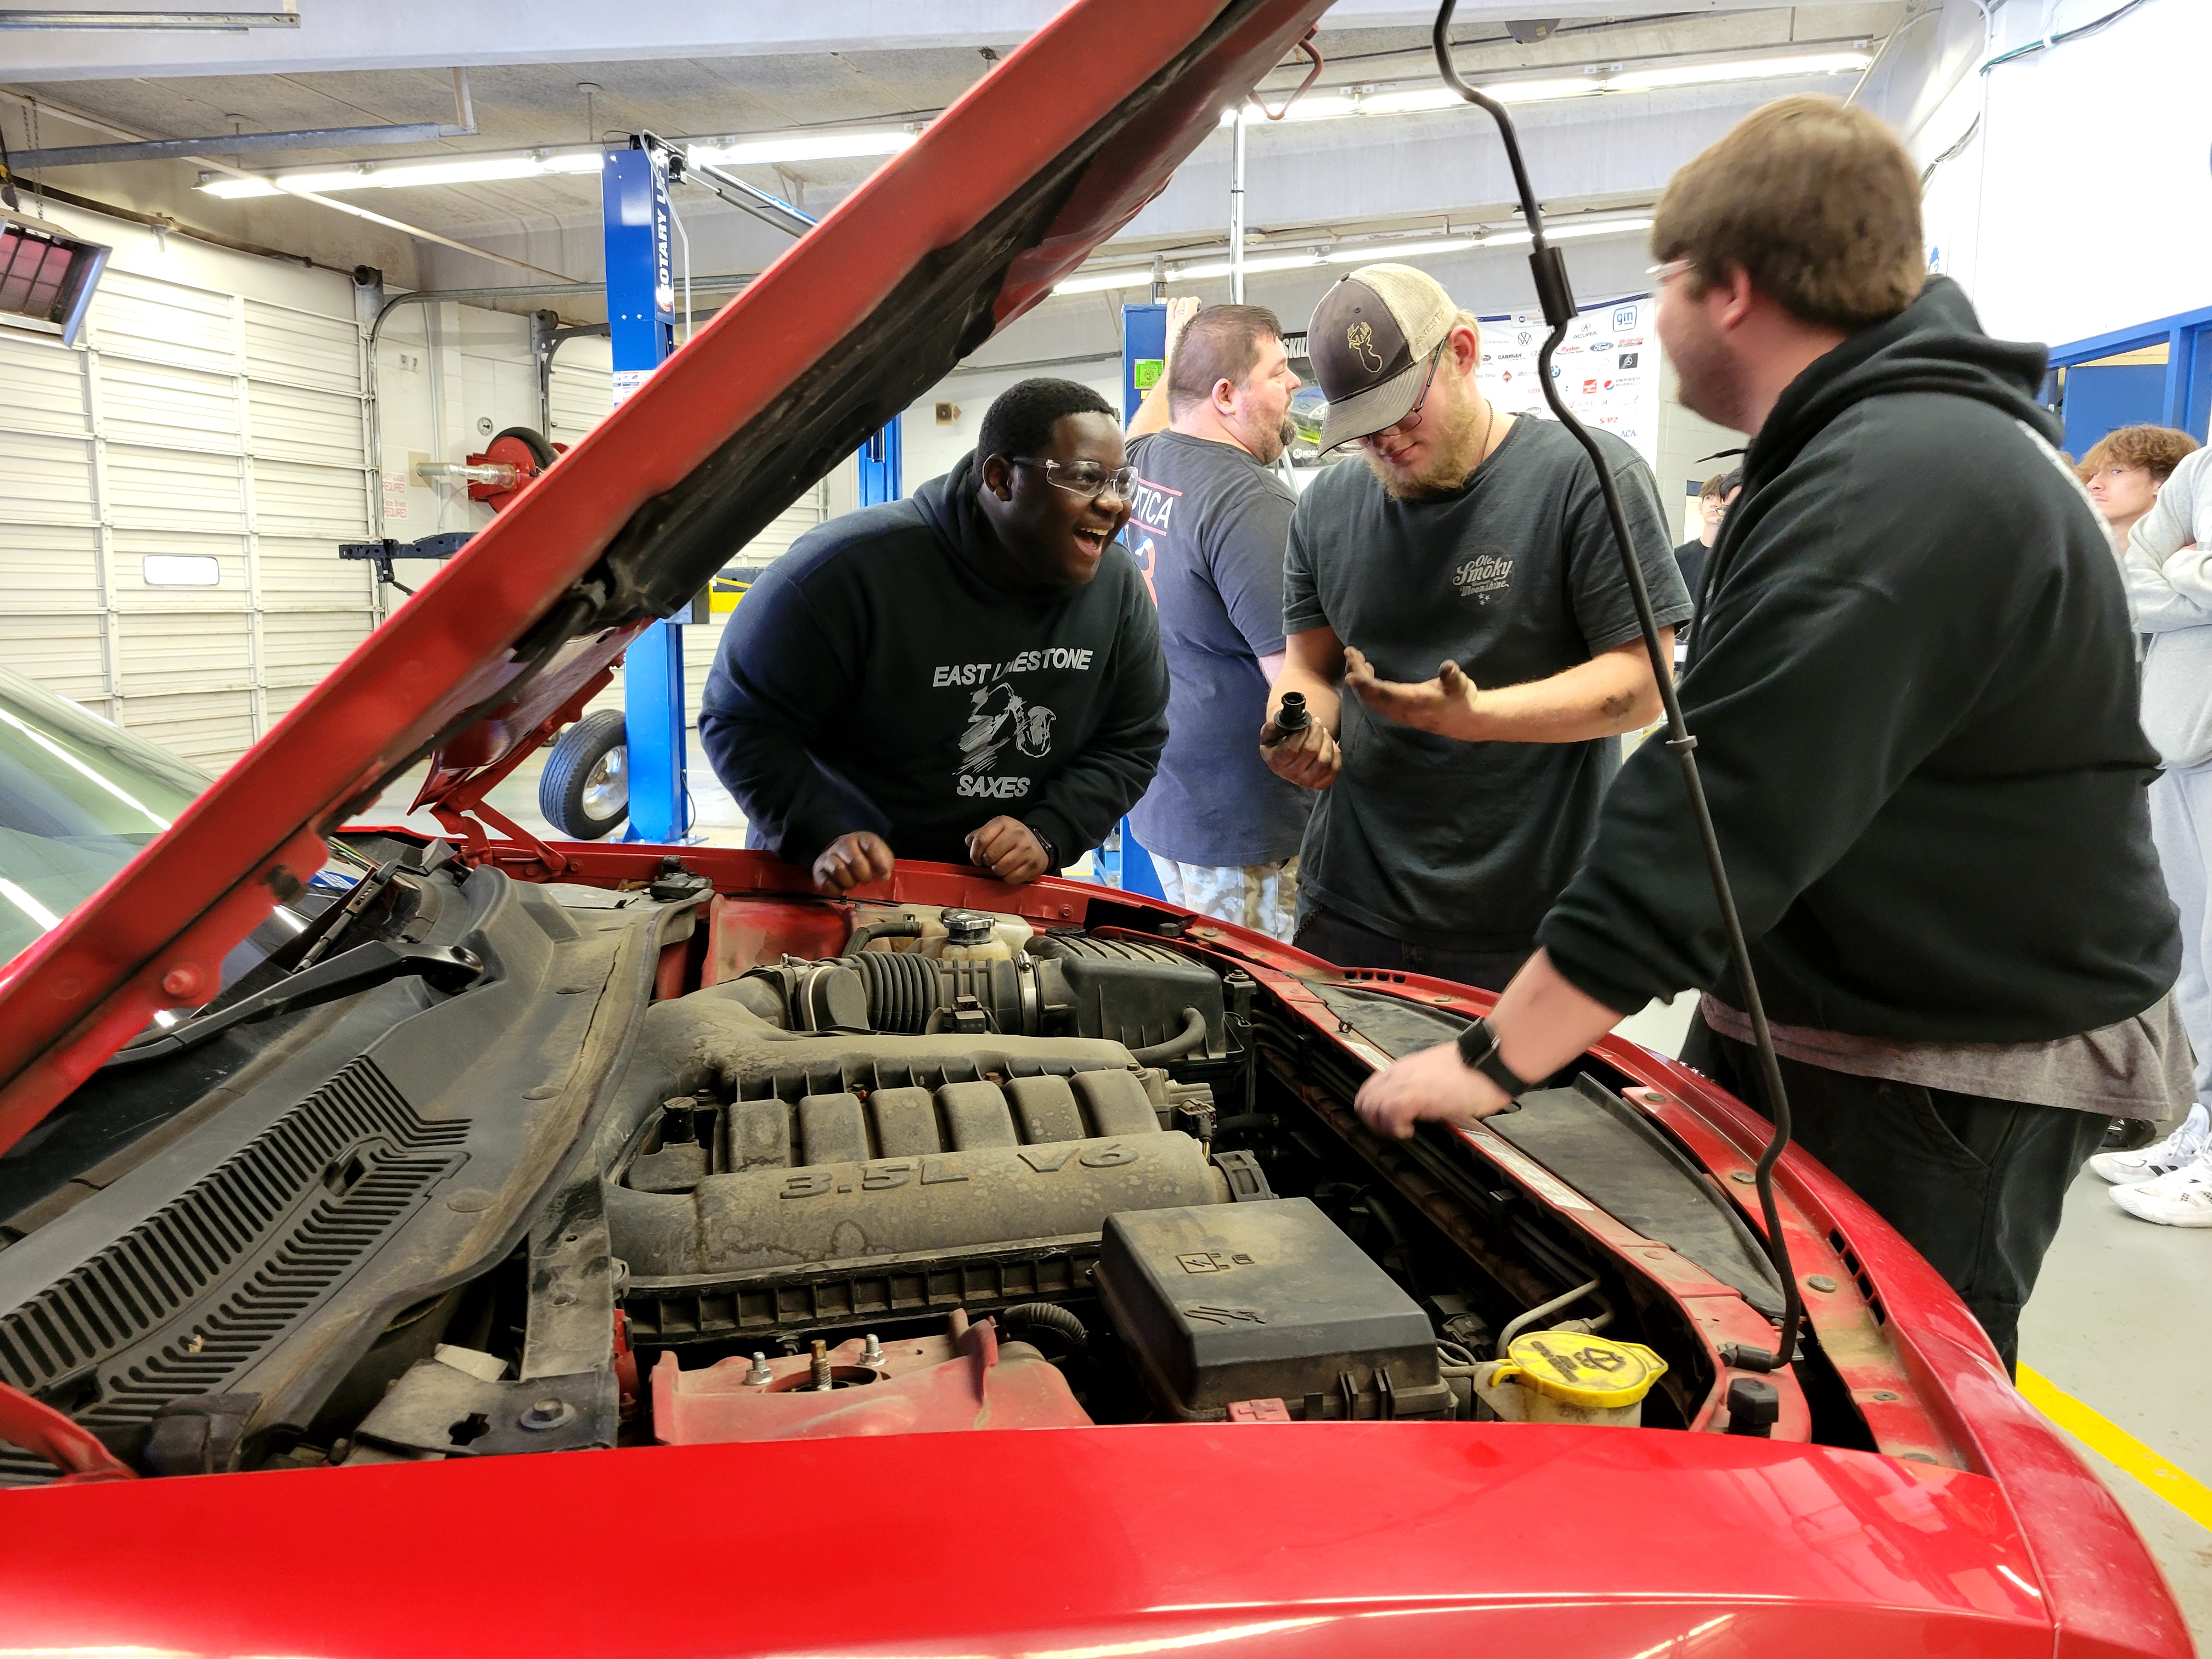 automotive students working on car engine